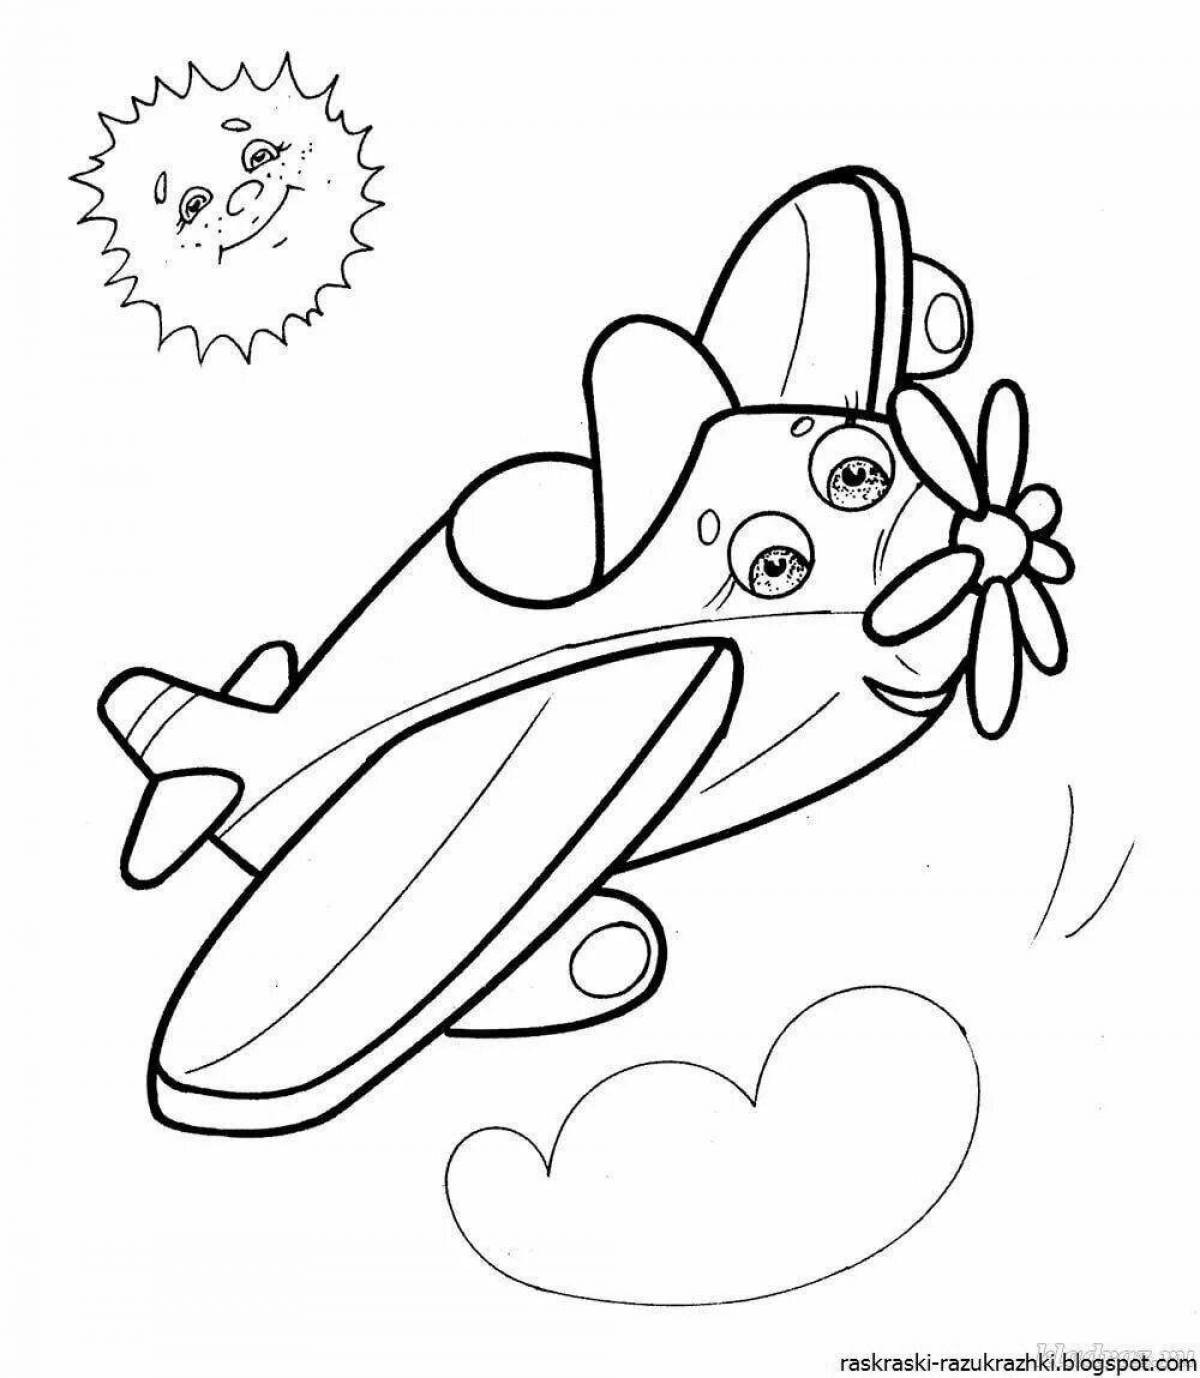 Airplane coloring page with colored splashes for kids